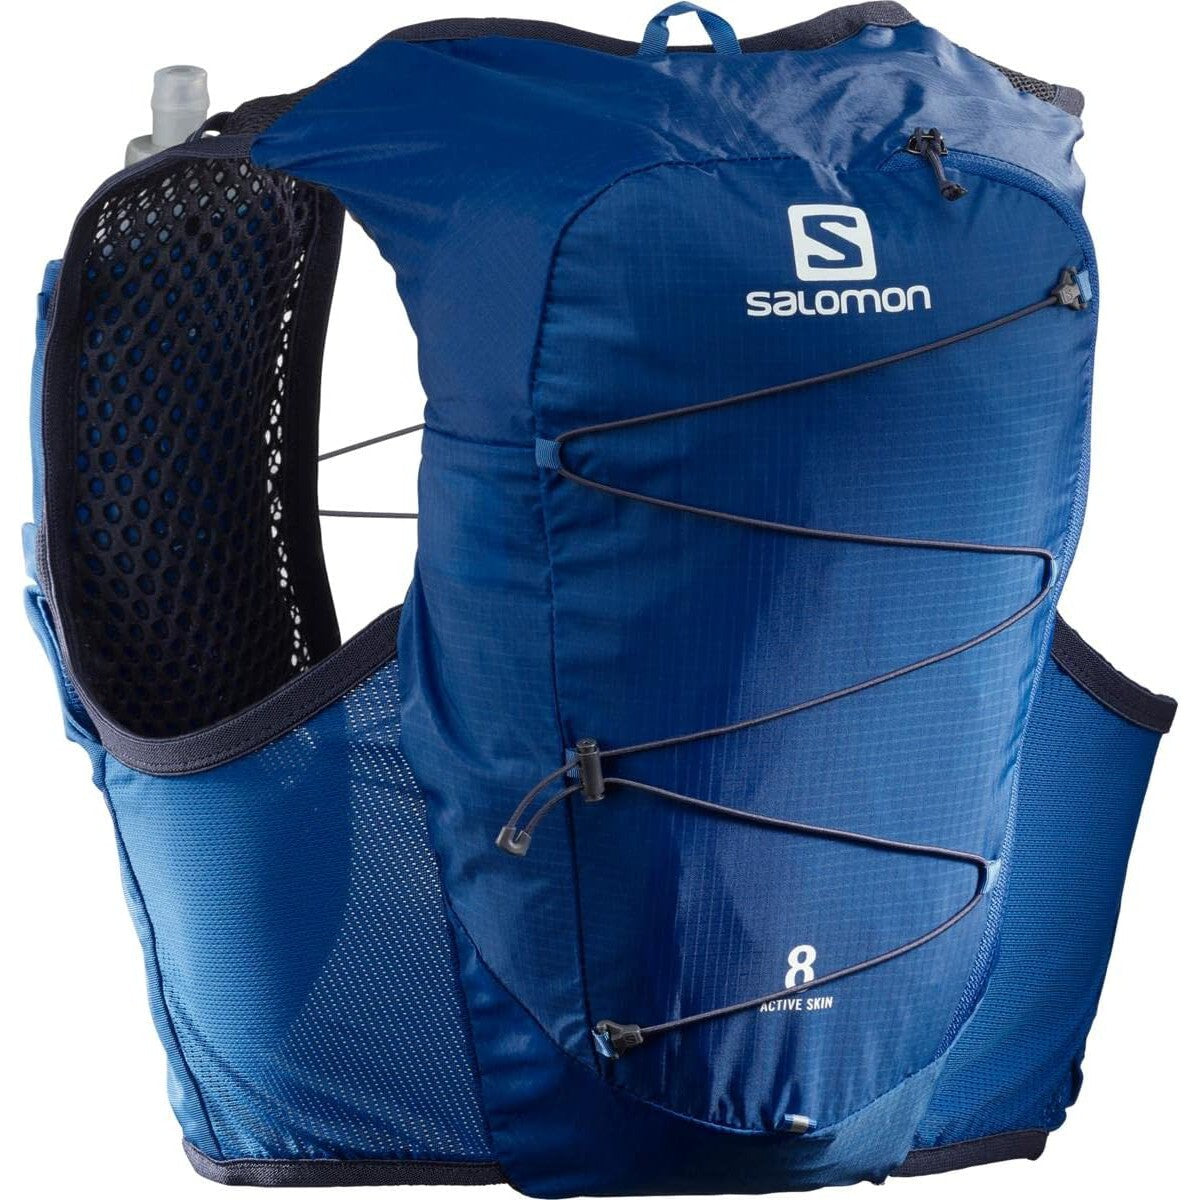 Salomon Active Skin 8 with flasks Nautical blue-Accessories-33-OFF